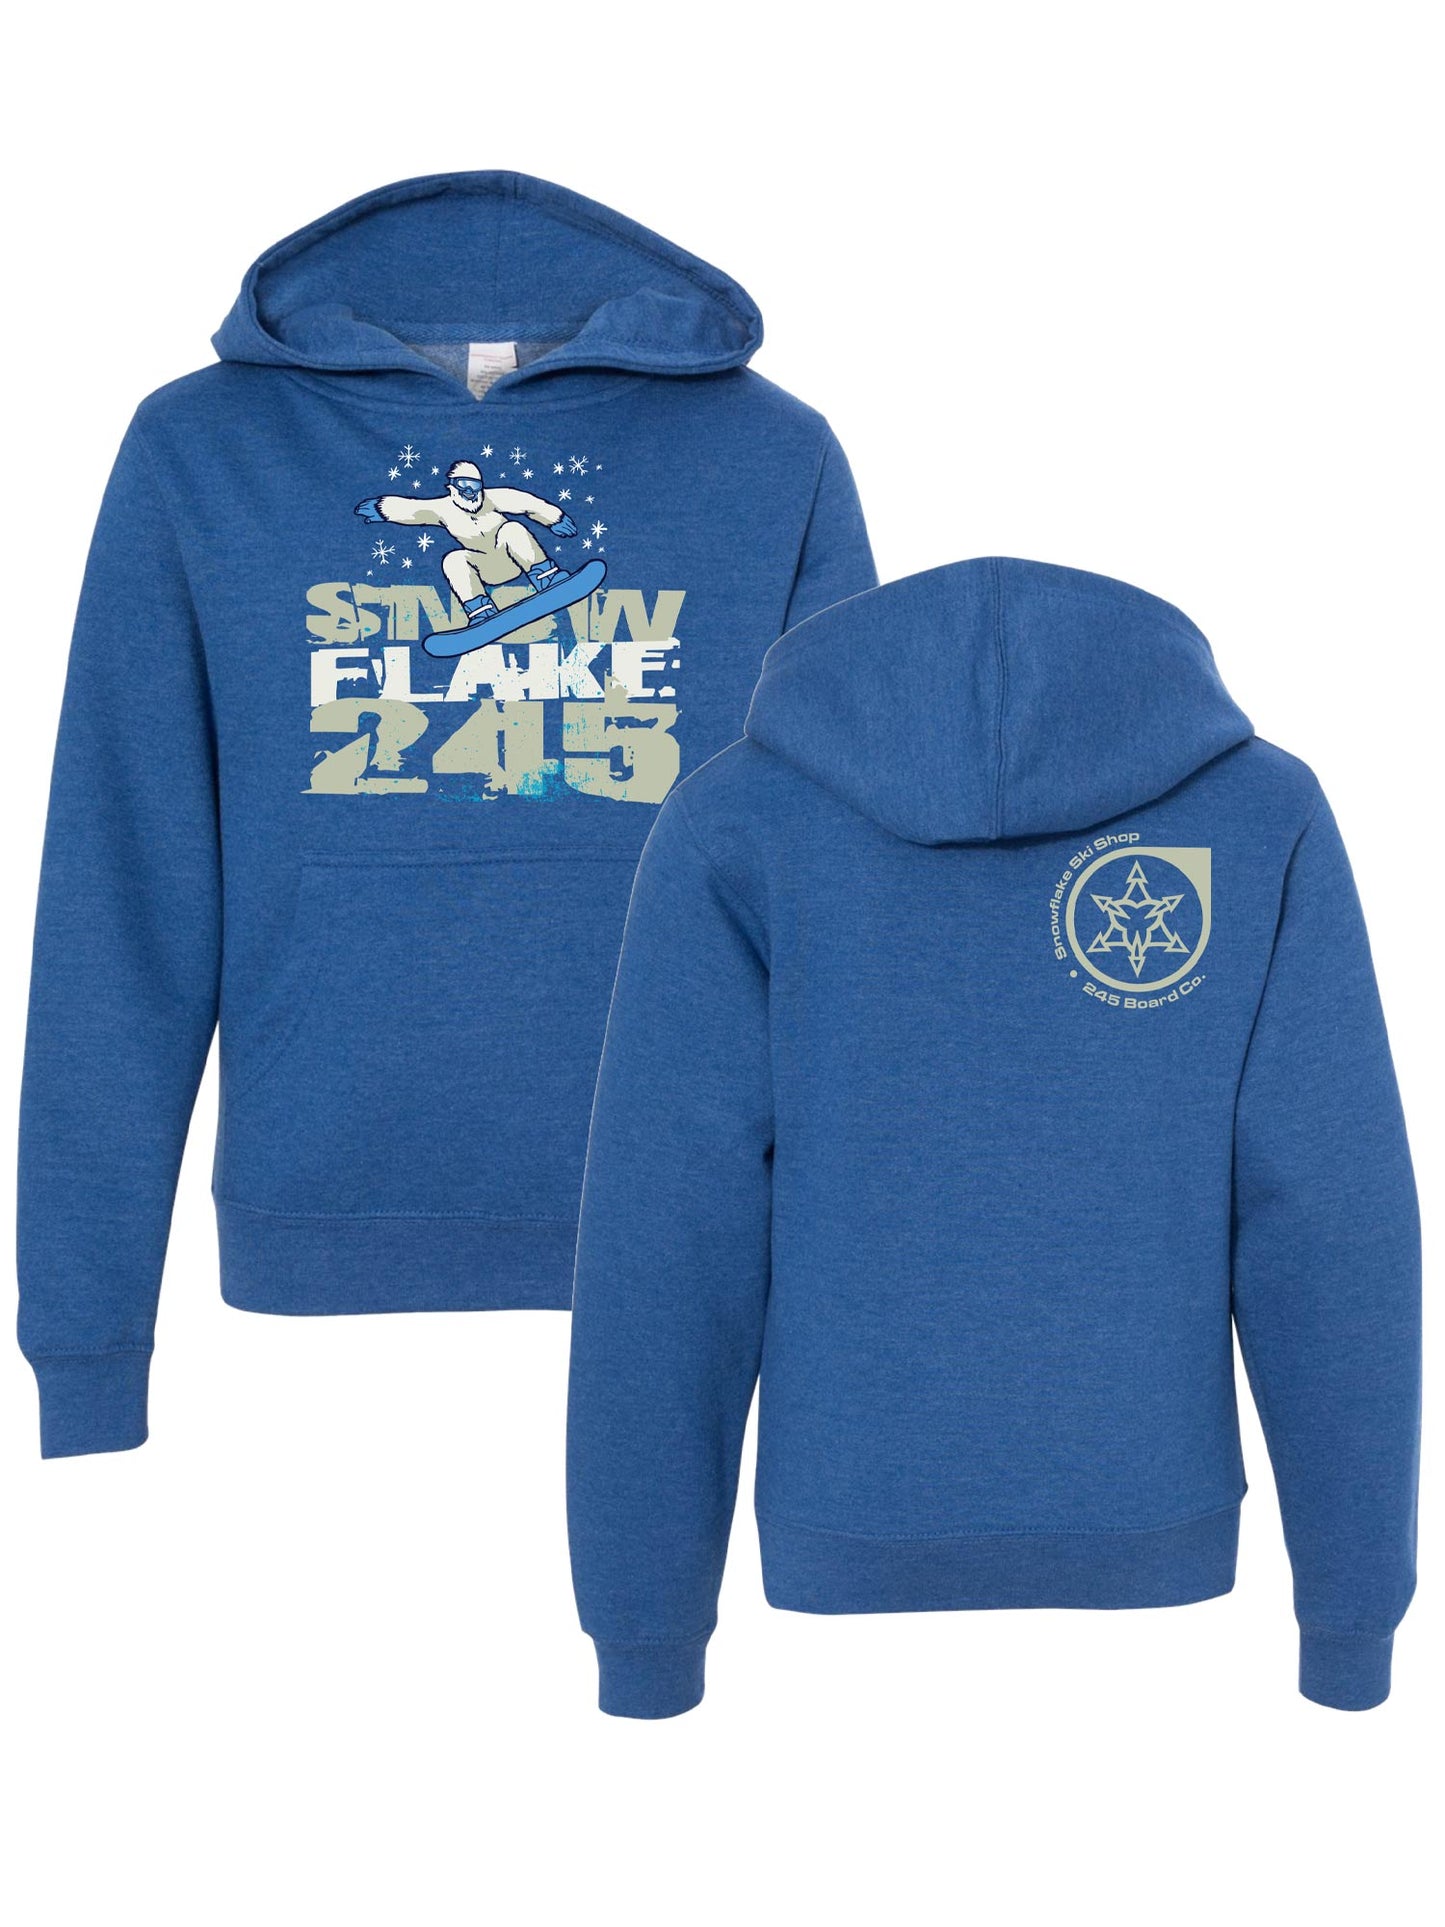 kids blue hoodie with a Yeti snowboarding graphic